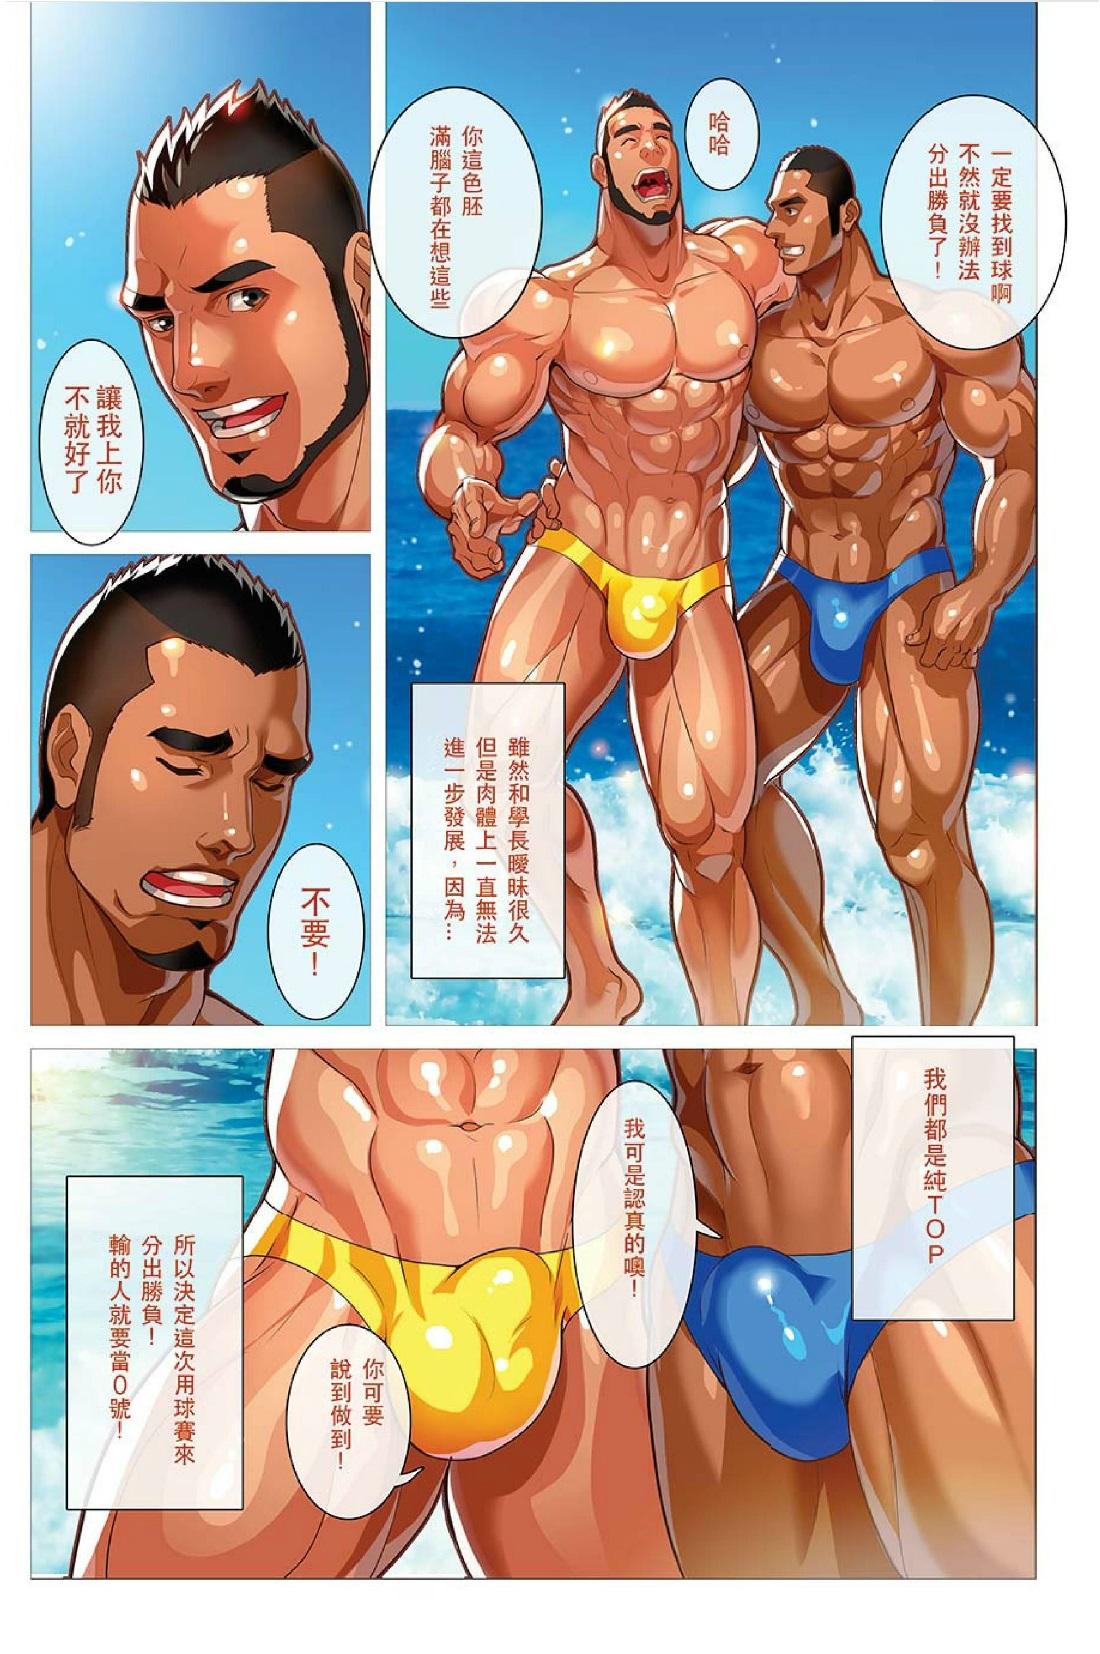 Footfetish 夏日男子筋肉潛艇堡 (Summer's end Muscle Heat - The Boys Of Summer 2015) by 大雄 (Da Sexy Xiong) + Bonus Prequel [CH] Analsex - Page 4